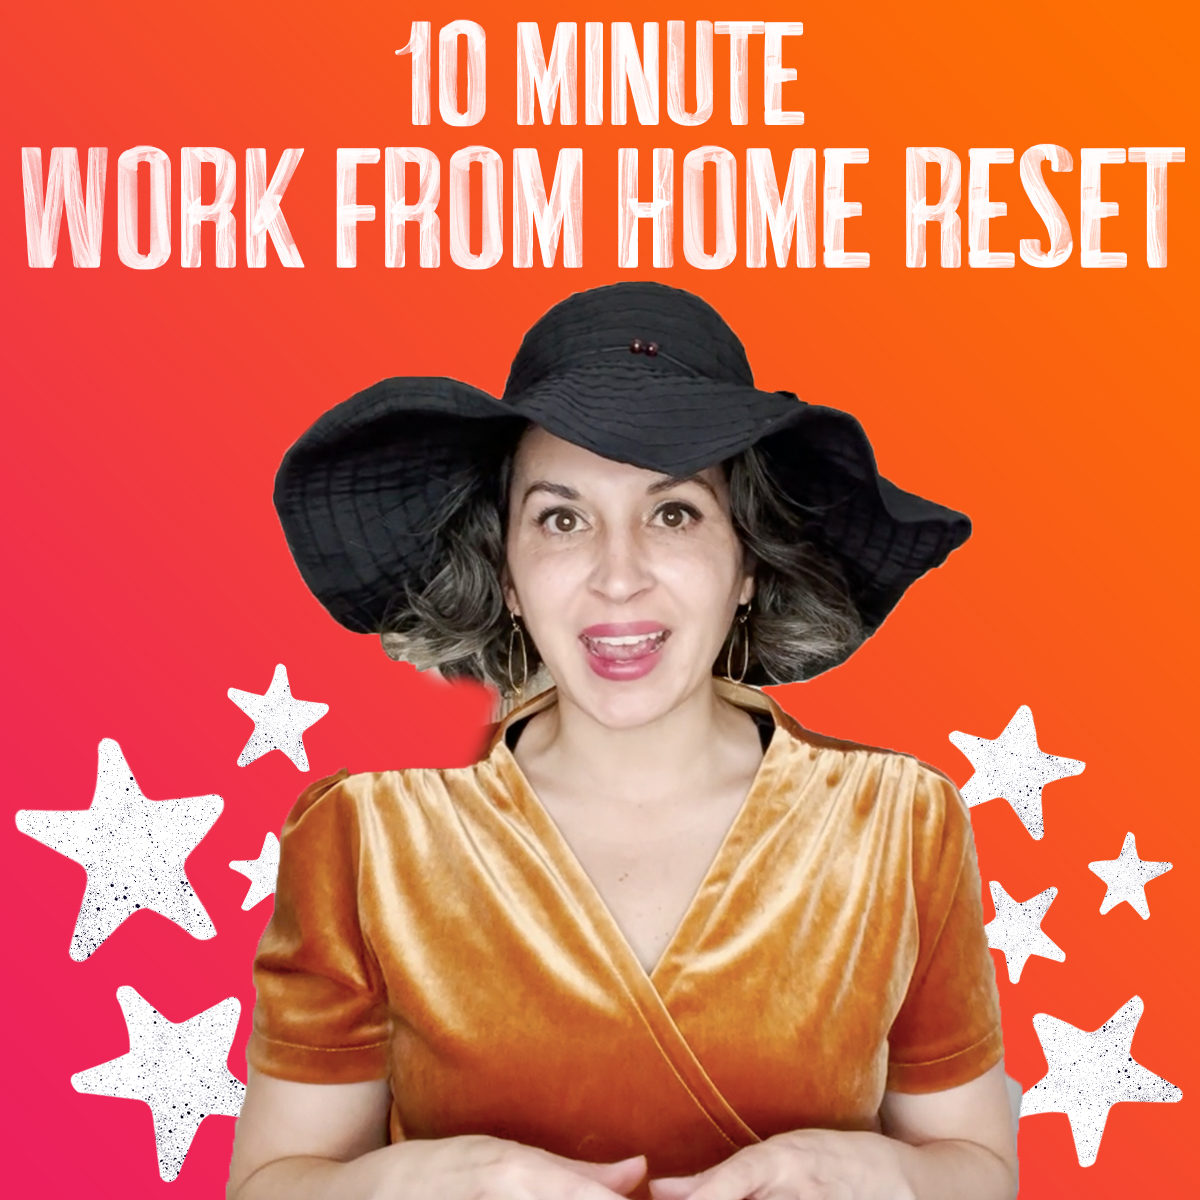 👸 10 Minute Work from Home Reset